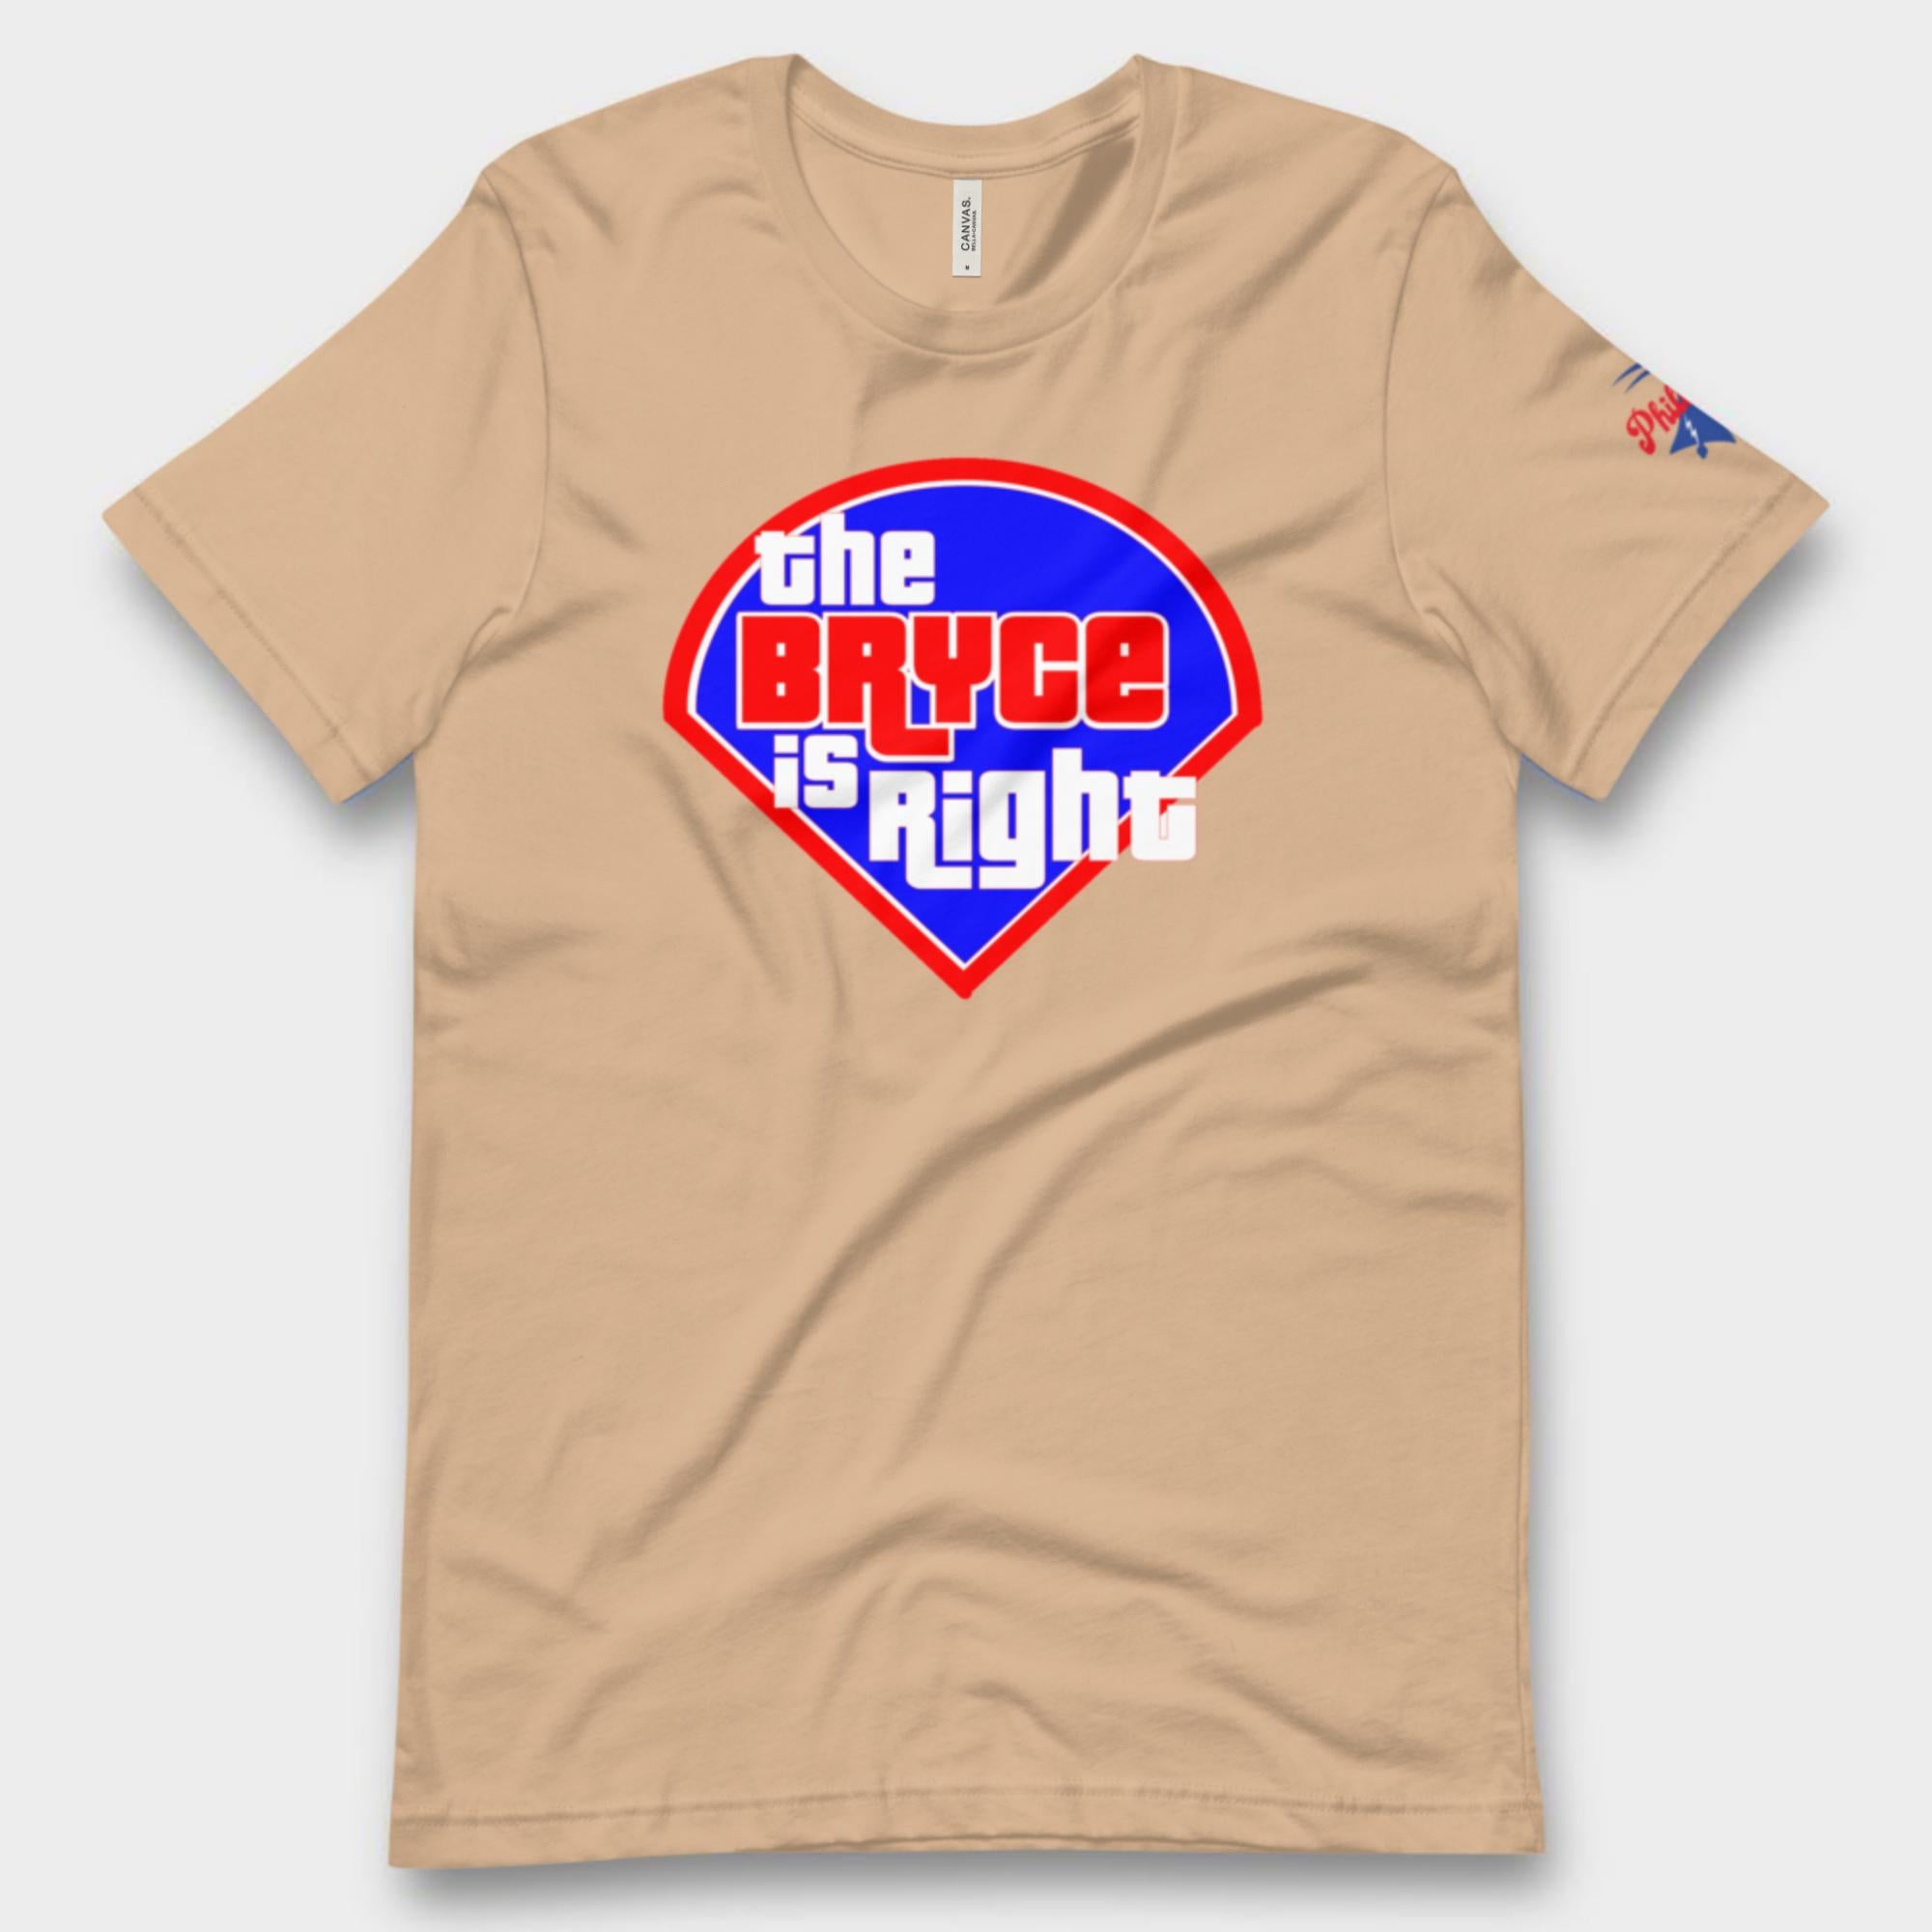 "The Bryce Is Right" Tee